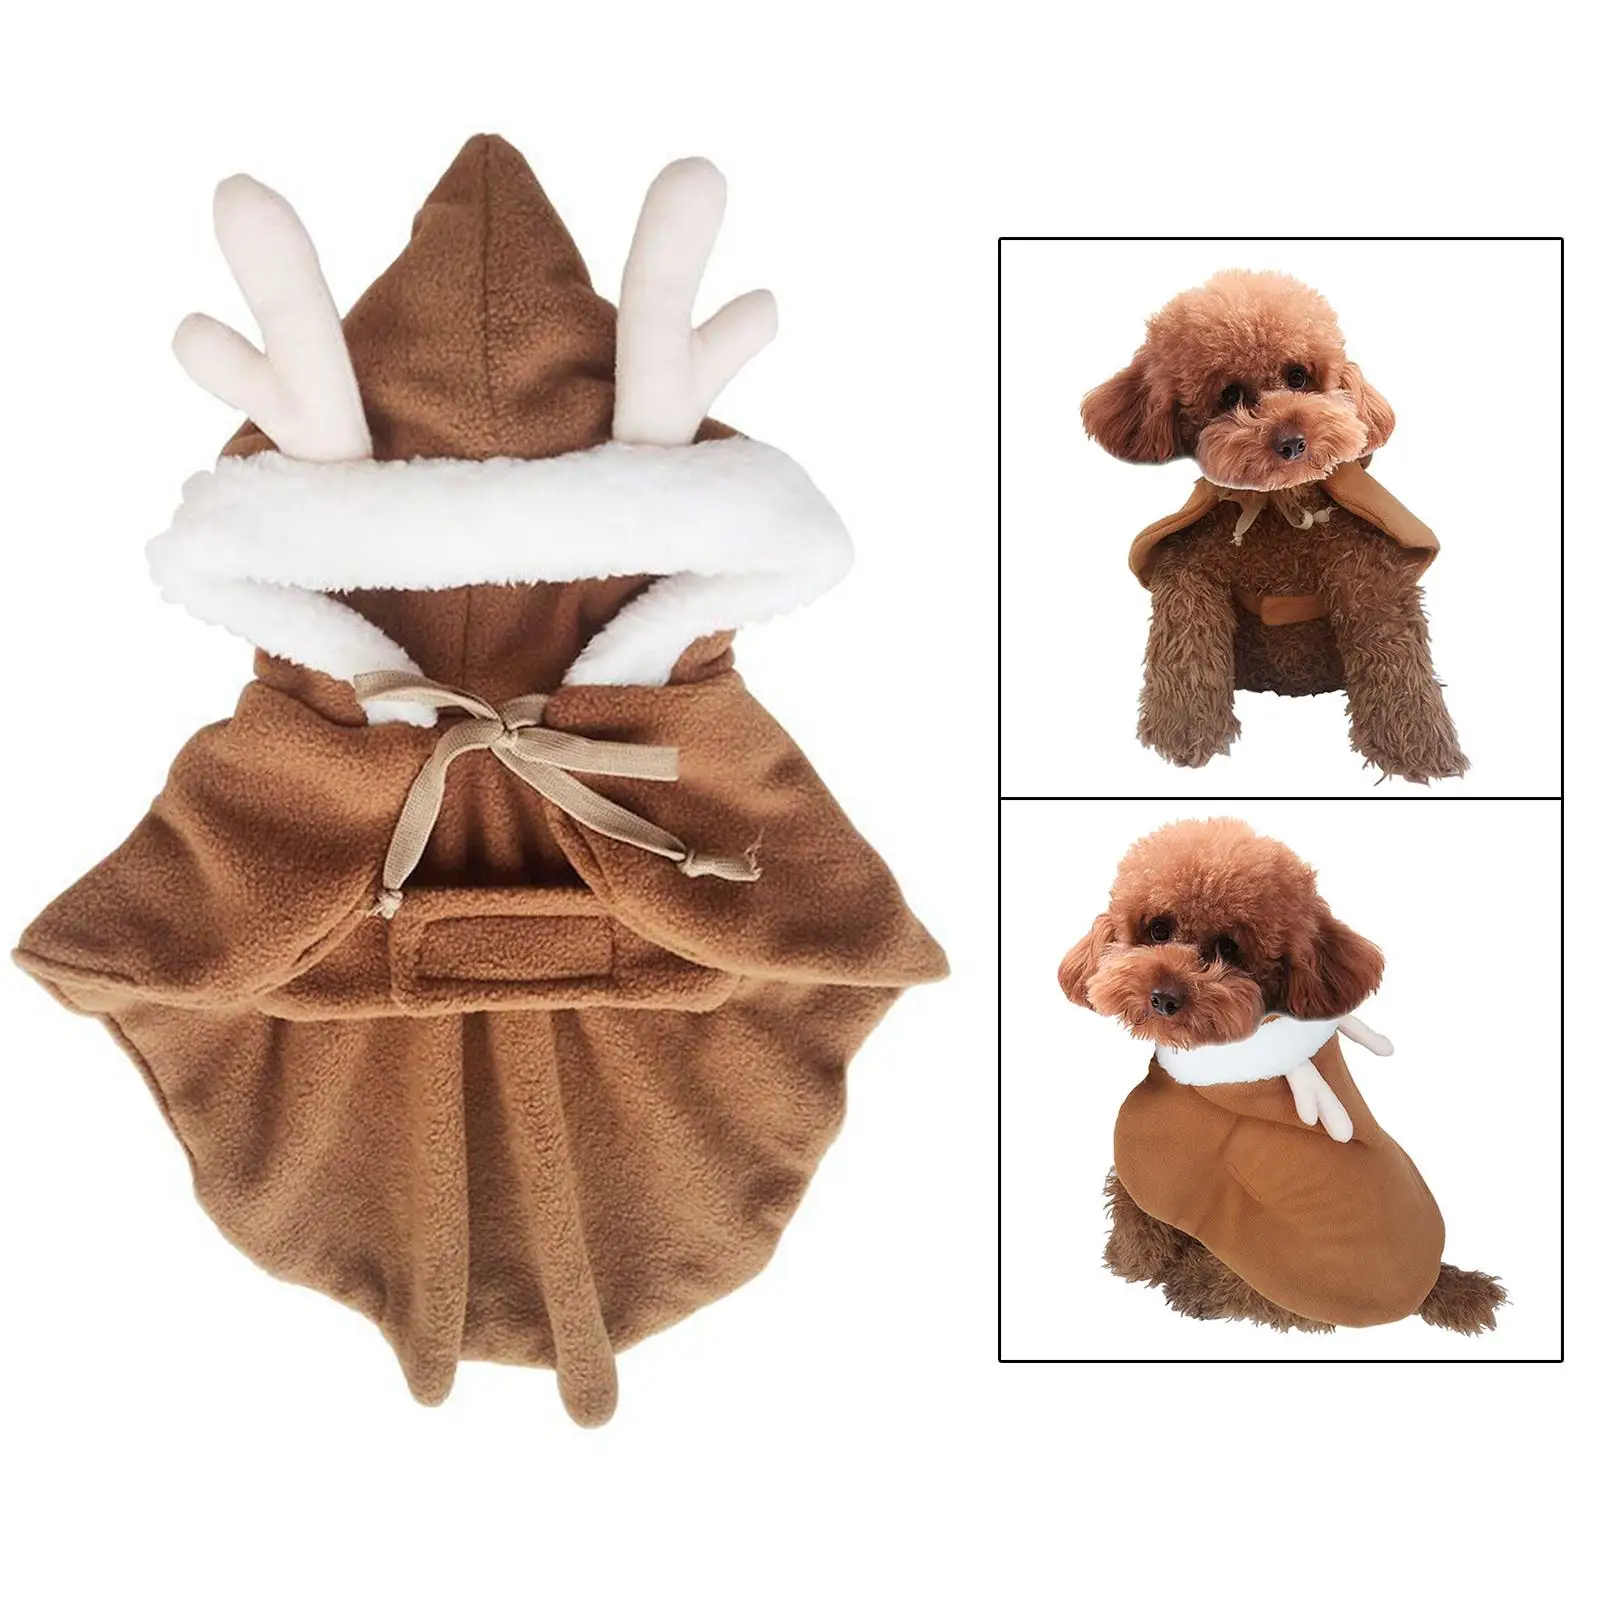 Puppy Xmas Cloak Soft Outfits with Reindeer Antlers Party Cosplay Dress Pajamas Pet Christmas Costume for Small Dogs Cats